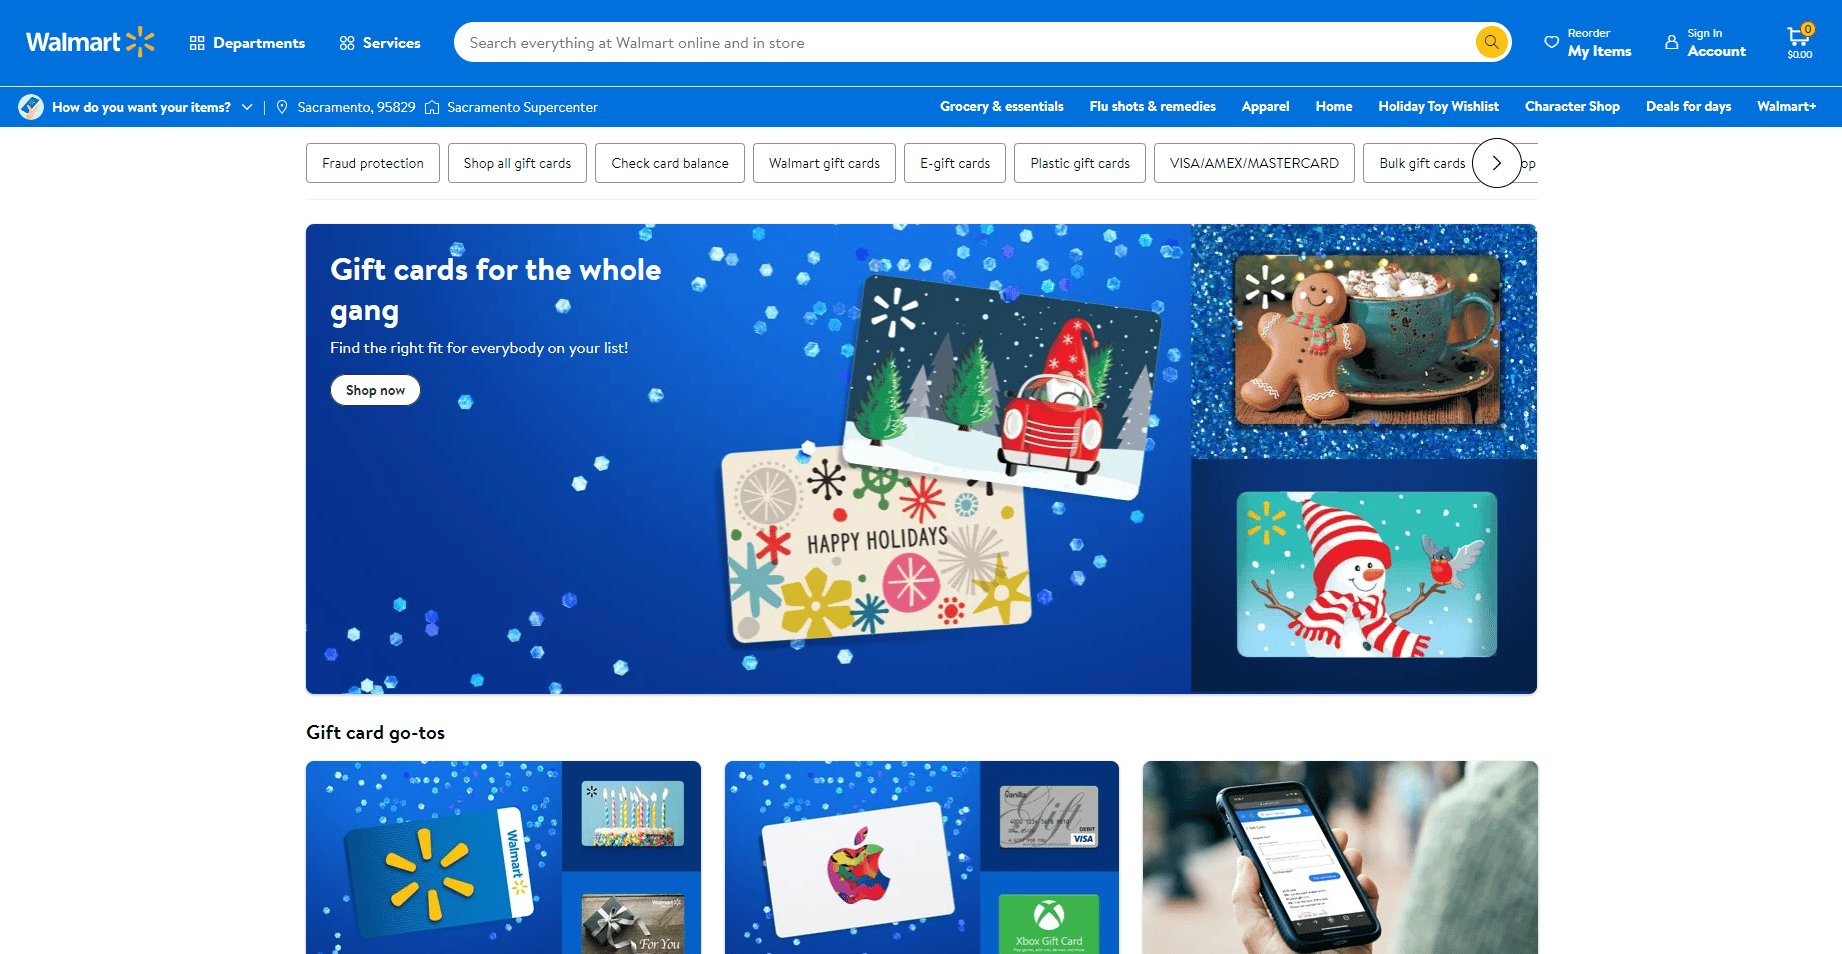 Wallmart gift cards page